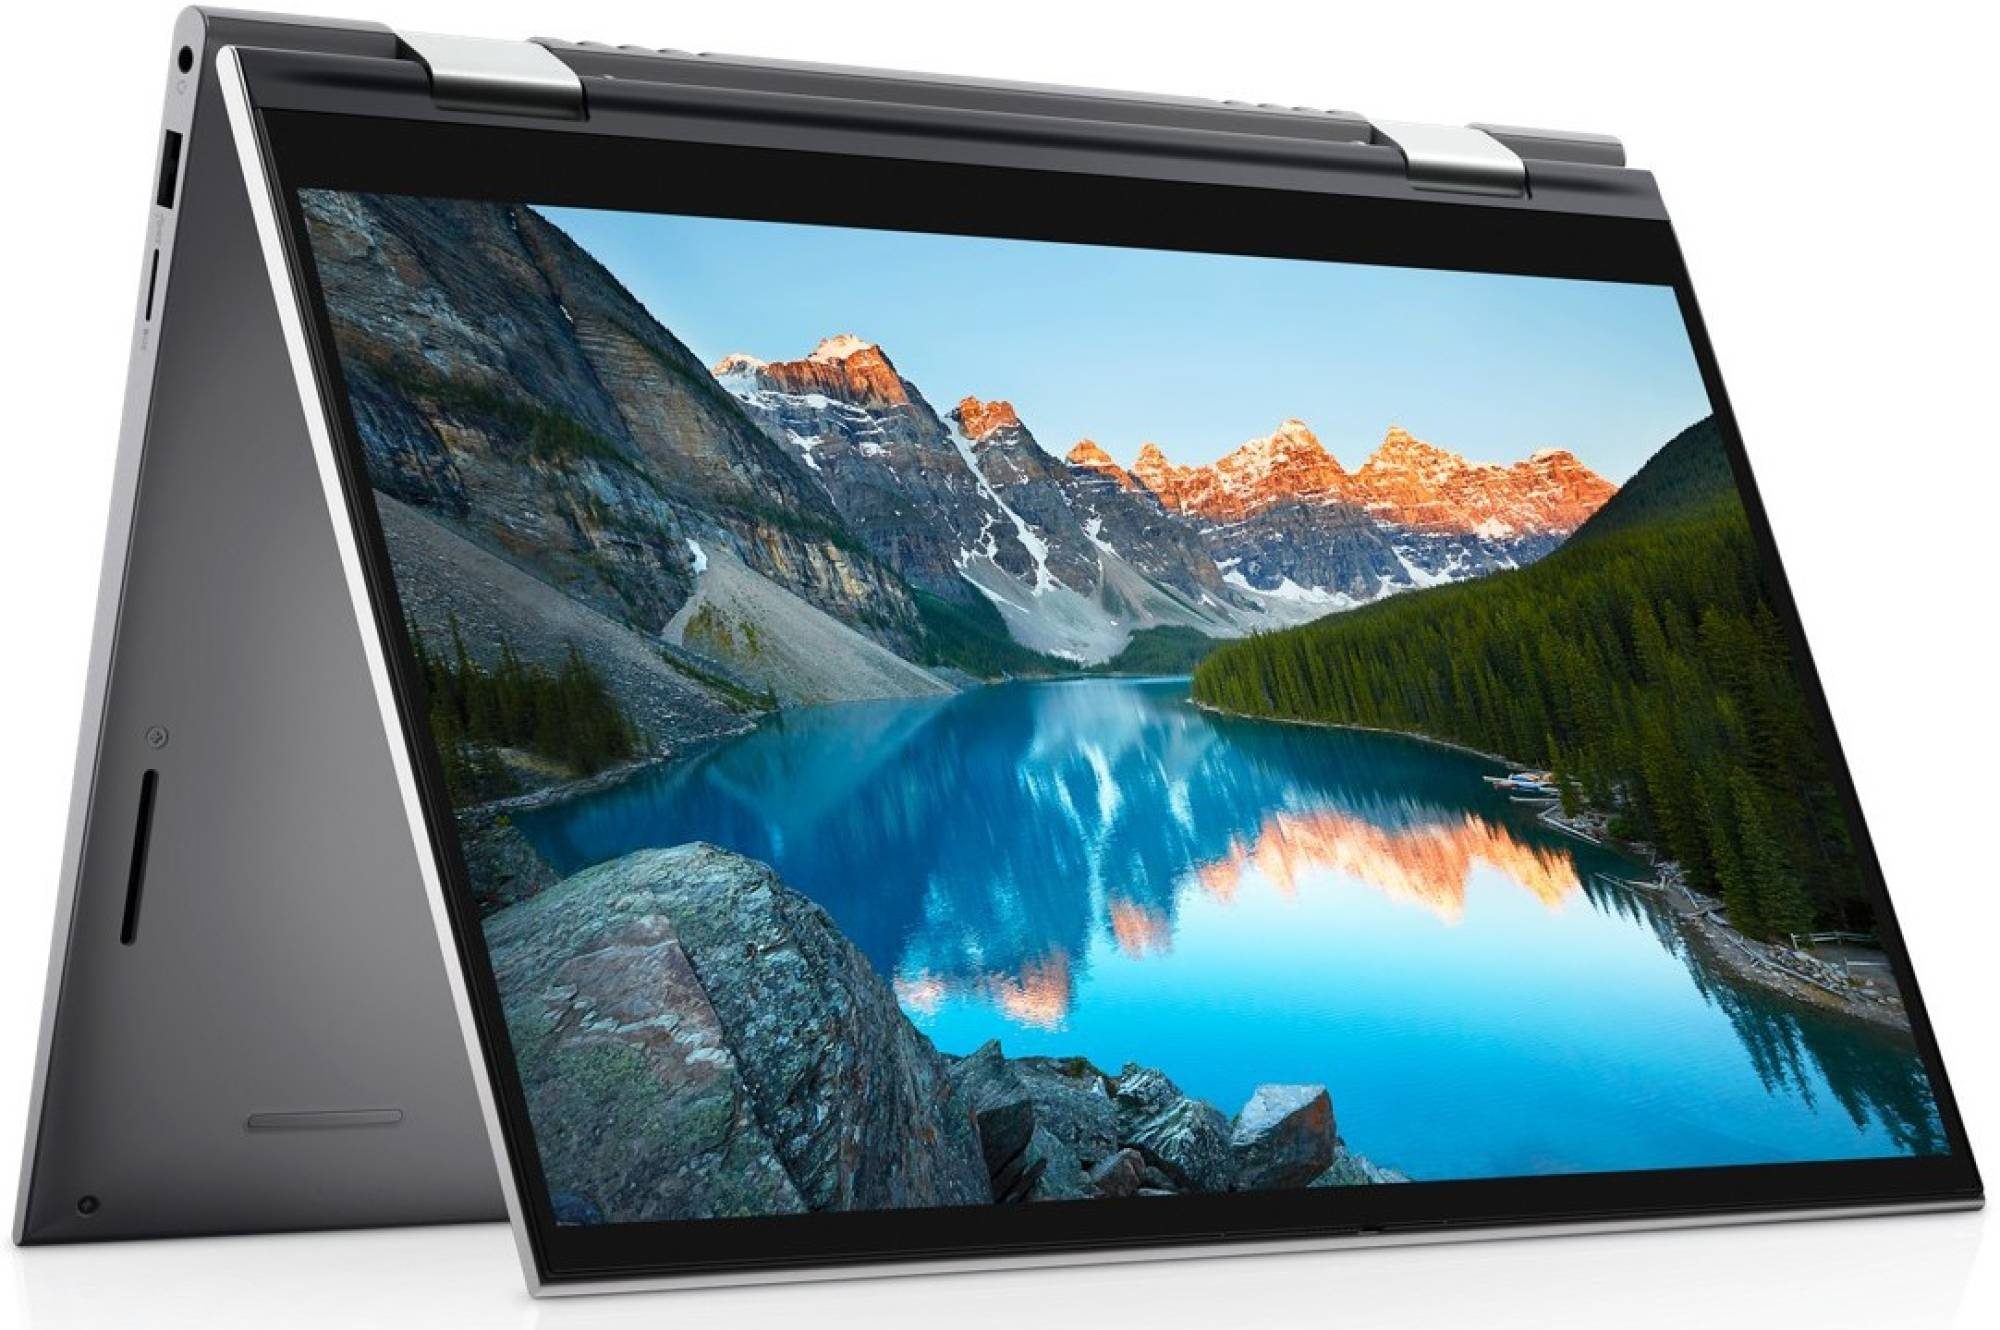 Dell Inspiron 14 5410 (2-in-1) - Specs, Tests, and Prices